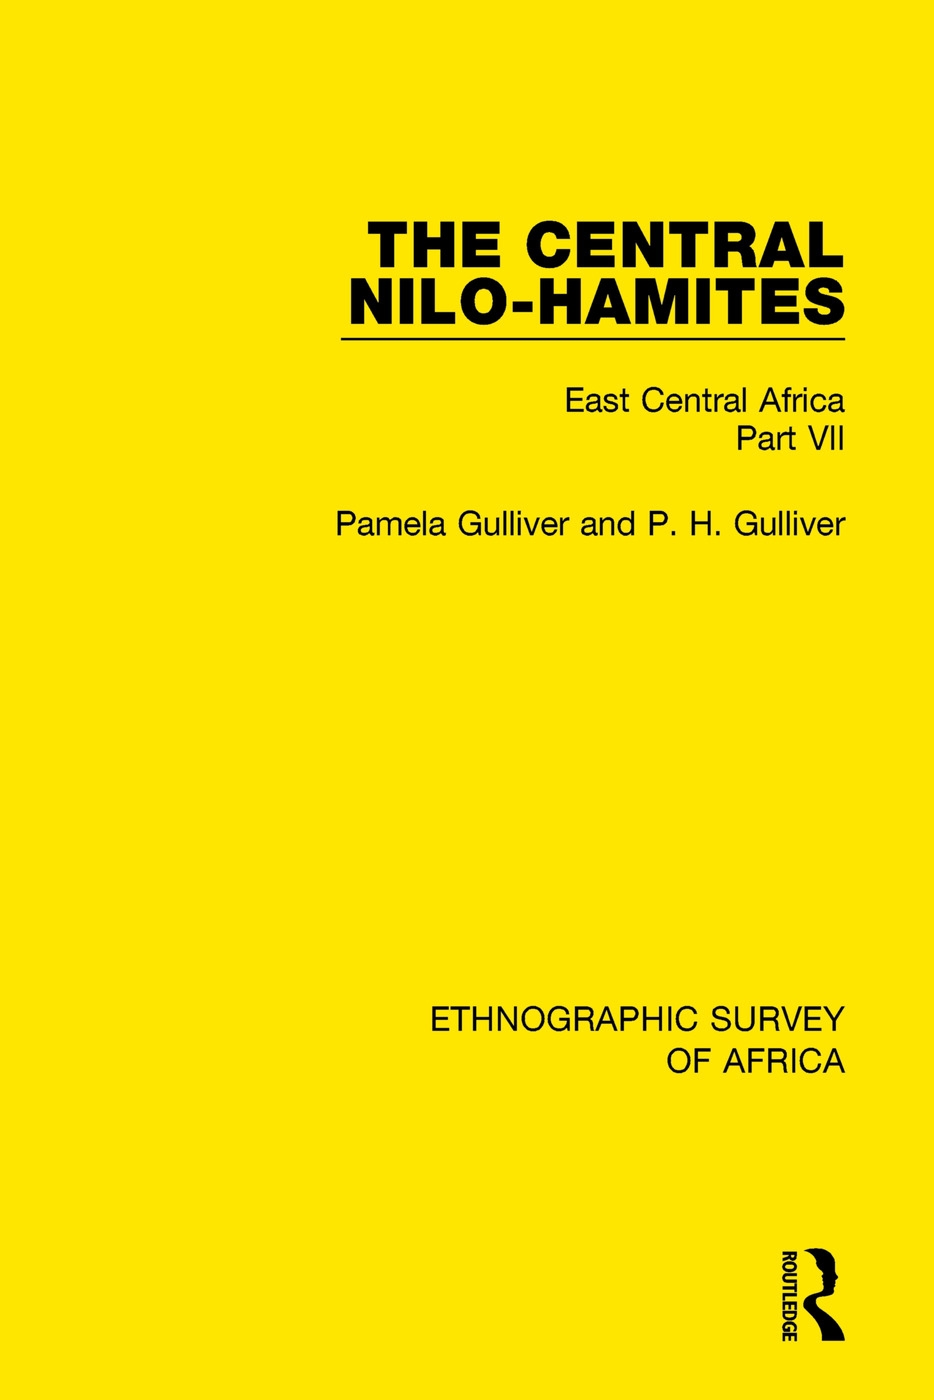 The Central Nilo-Hamites: East Central Africa Part VII